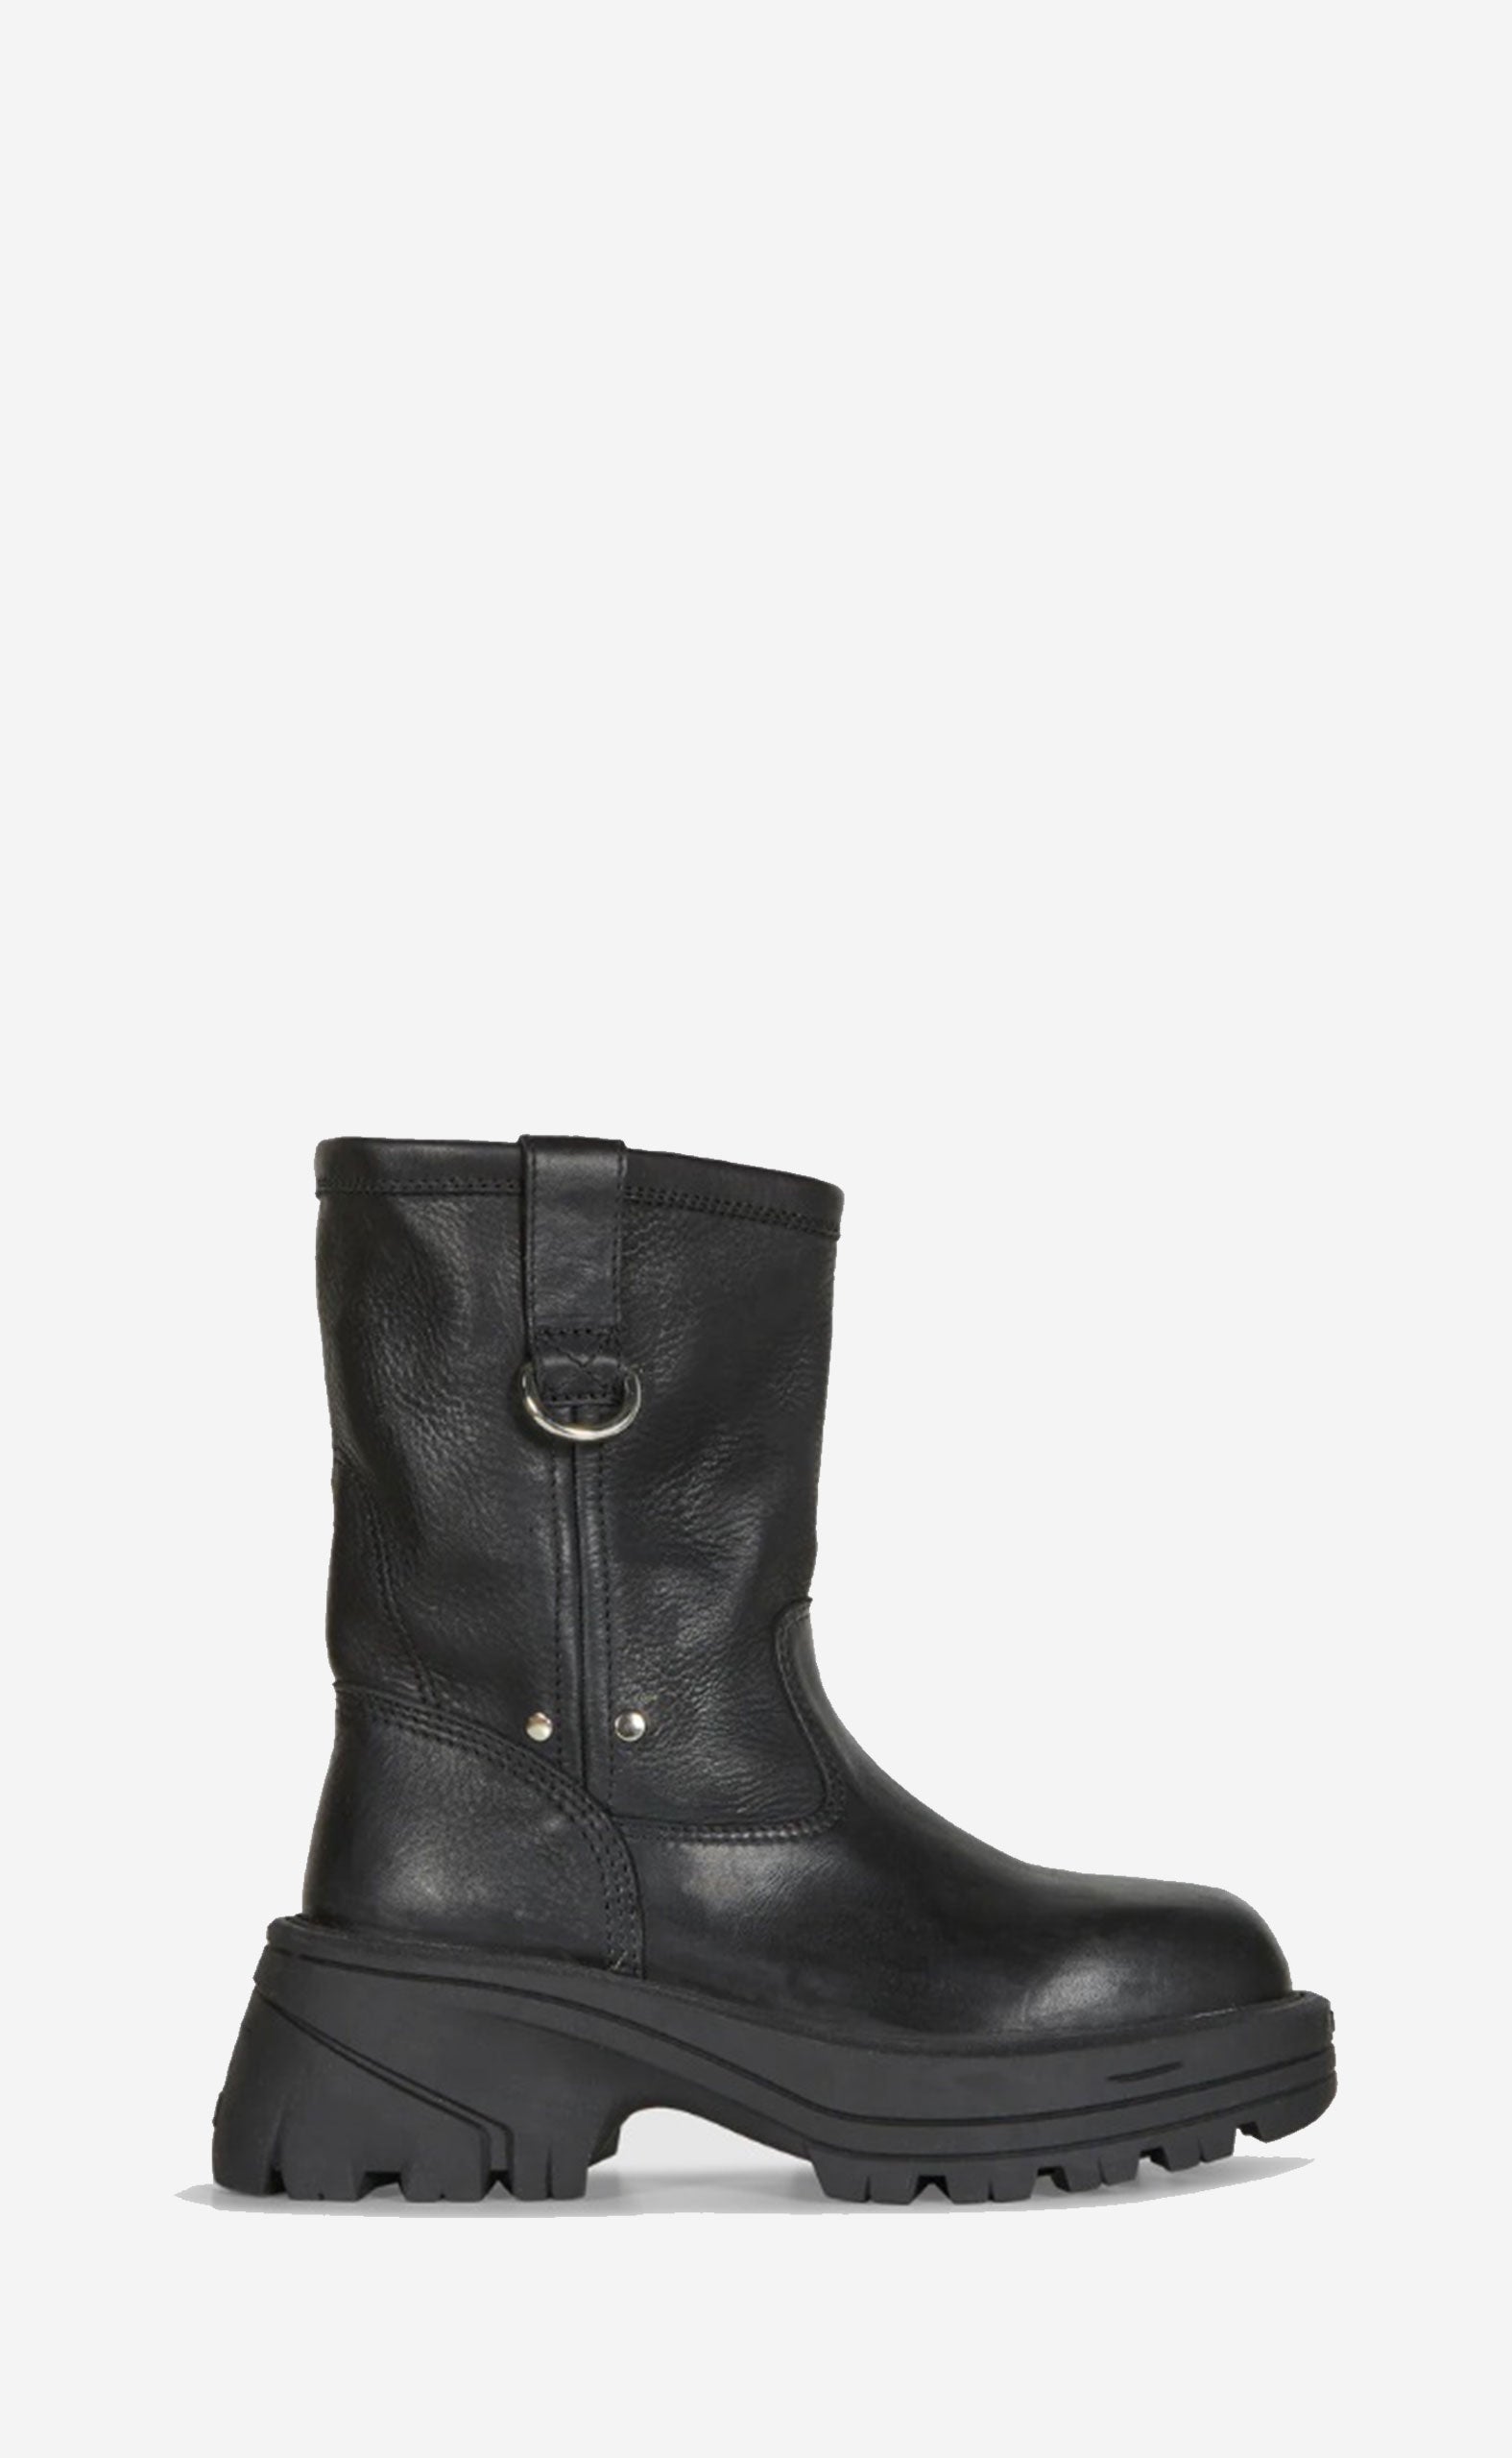 BLACK WORK BOOT LEATHER